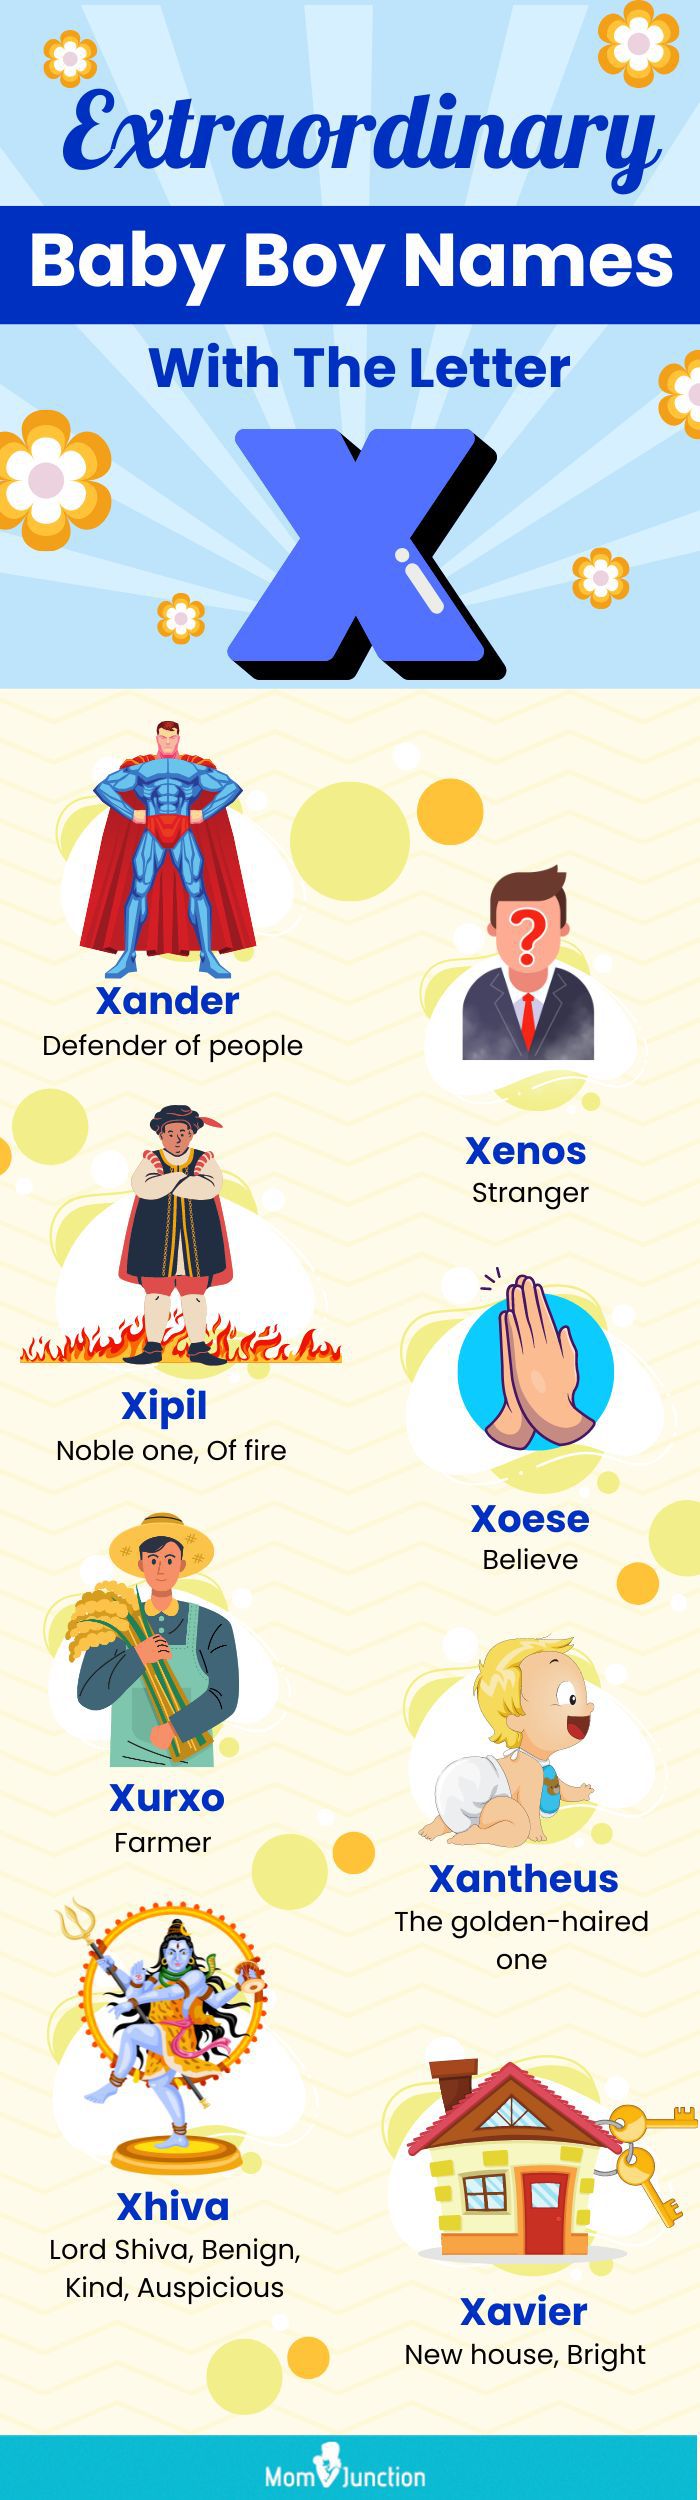 extraordinary baby boy names with the letter x (infographic)